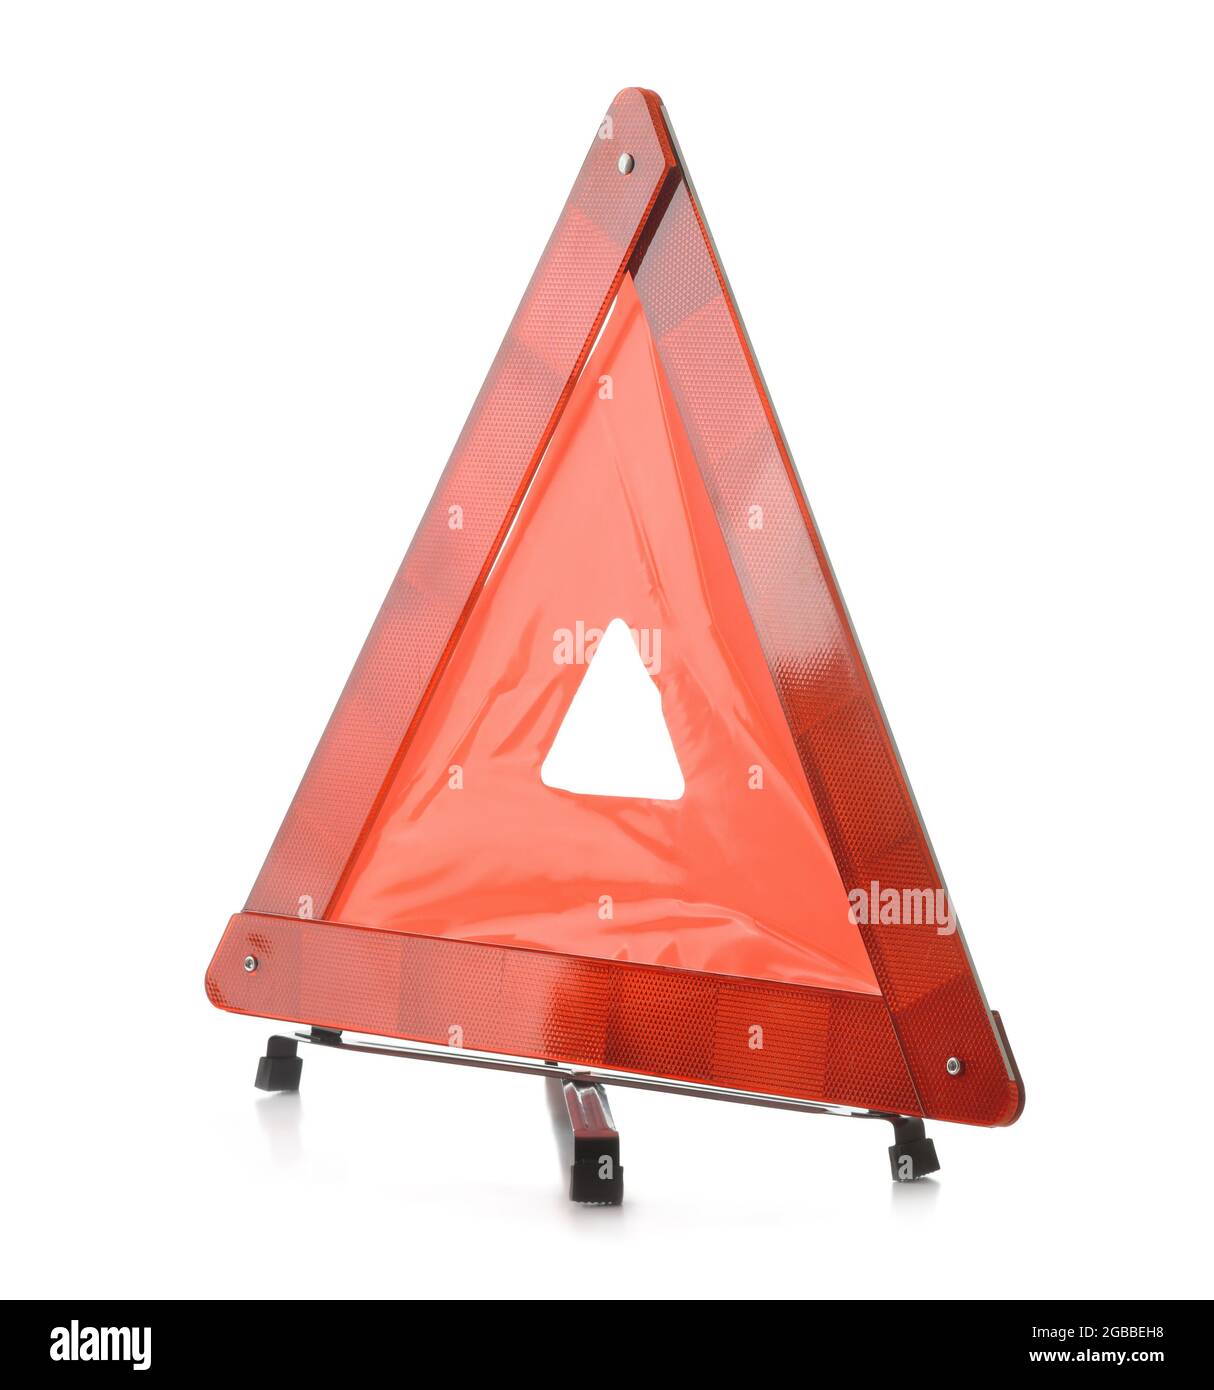 Red reflective traffic warning triangle isolated on white Stock Photo